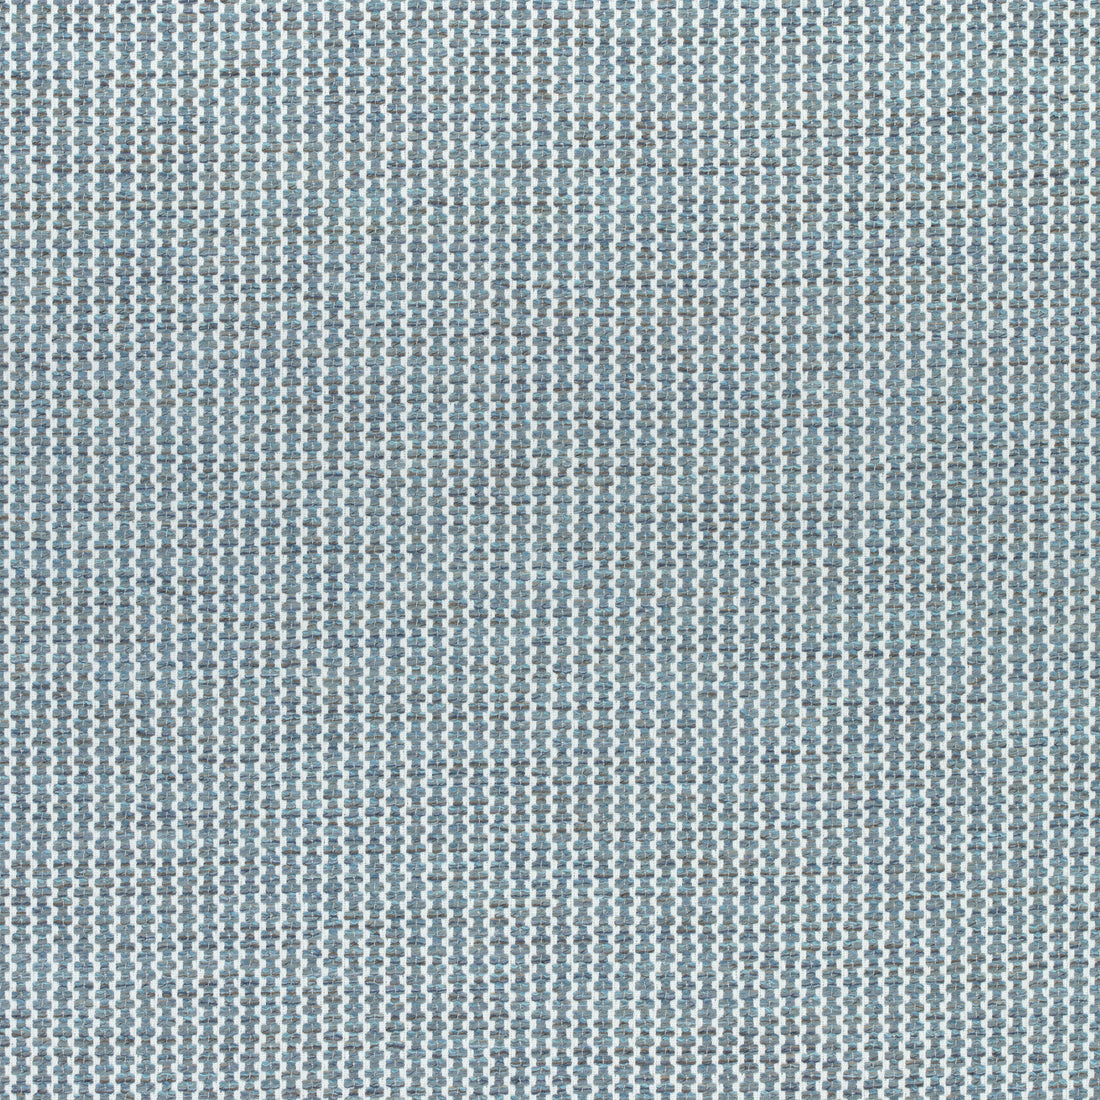 Ryder fabric in slate blue color - pattern number W74087 - by Thibaut in the Cadence collection